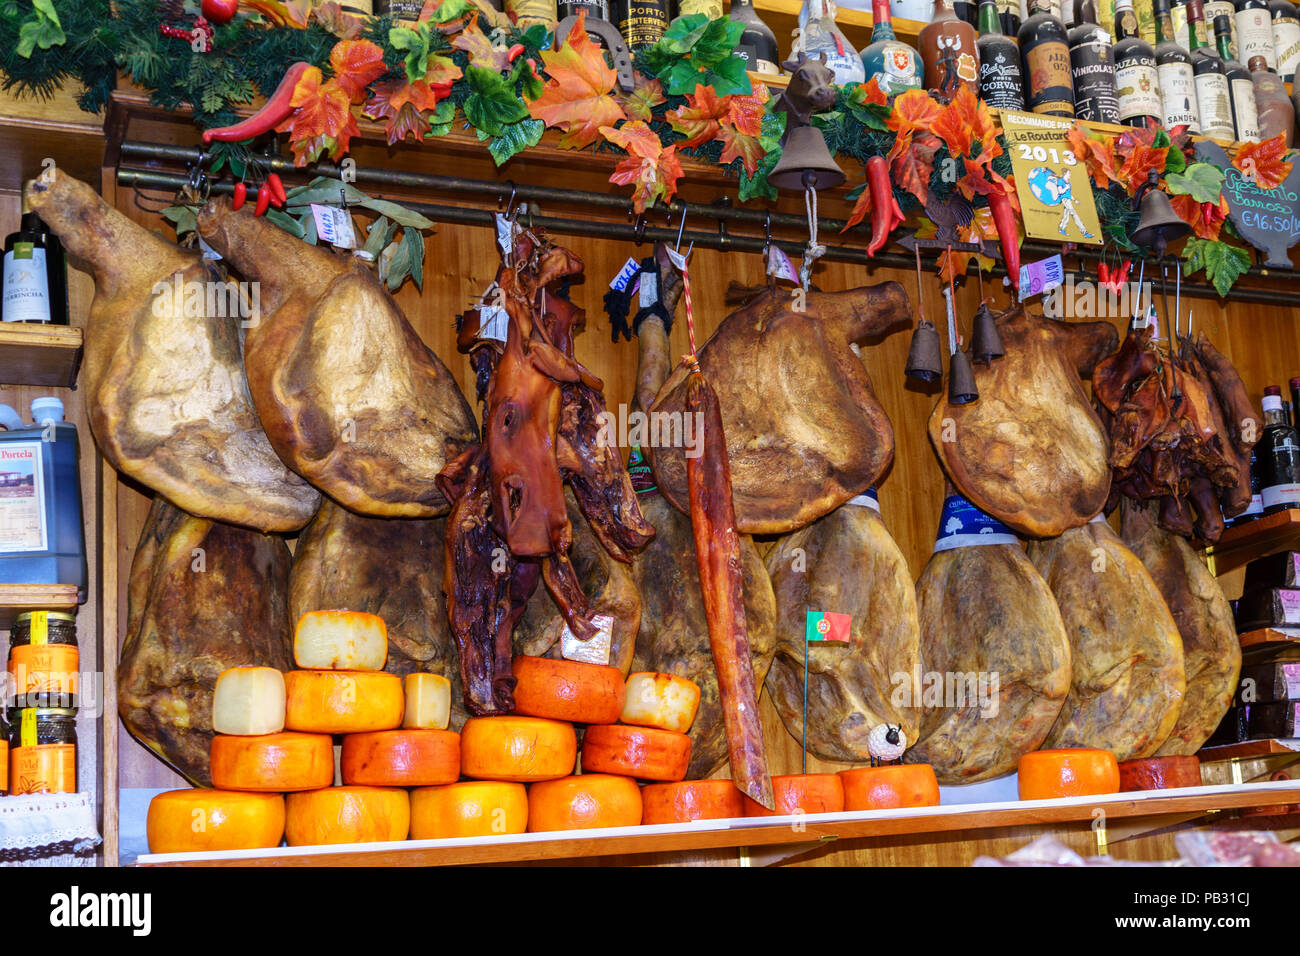 Iberian Ham hanging from hooks in a traditional delicatessan in Portugal. A row of round cheeses are arranged in the front. Stock Photo